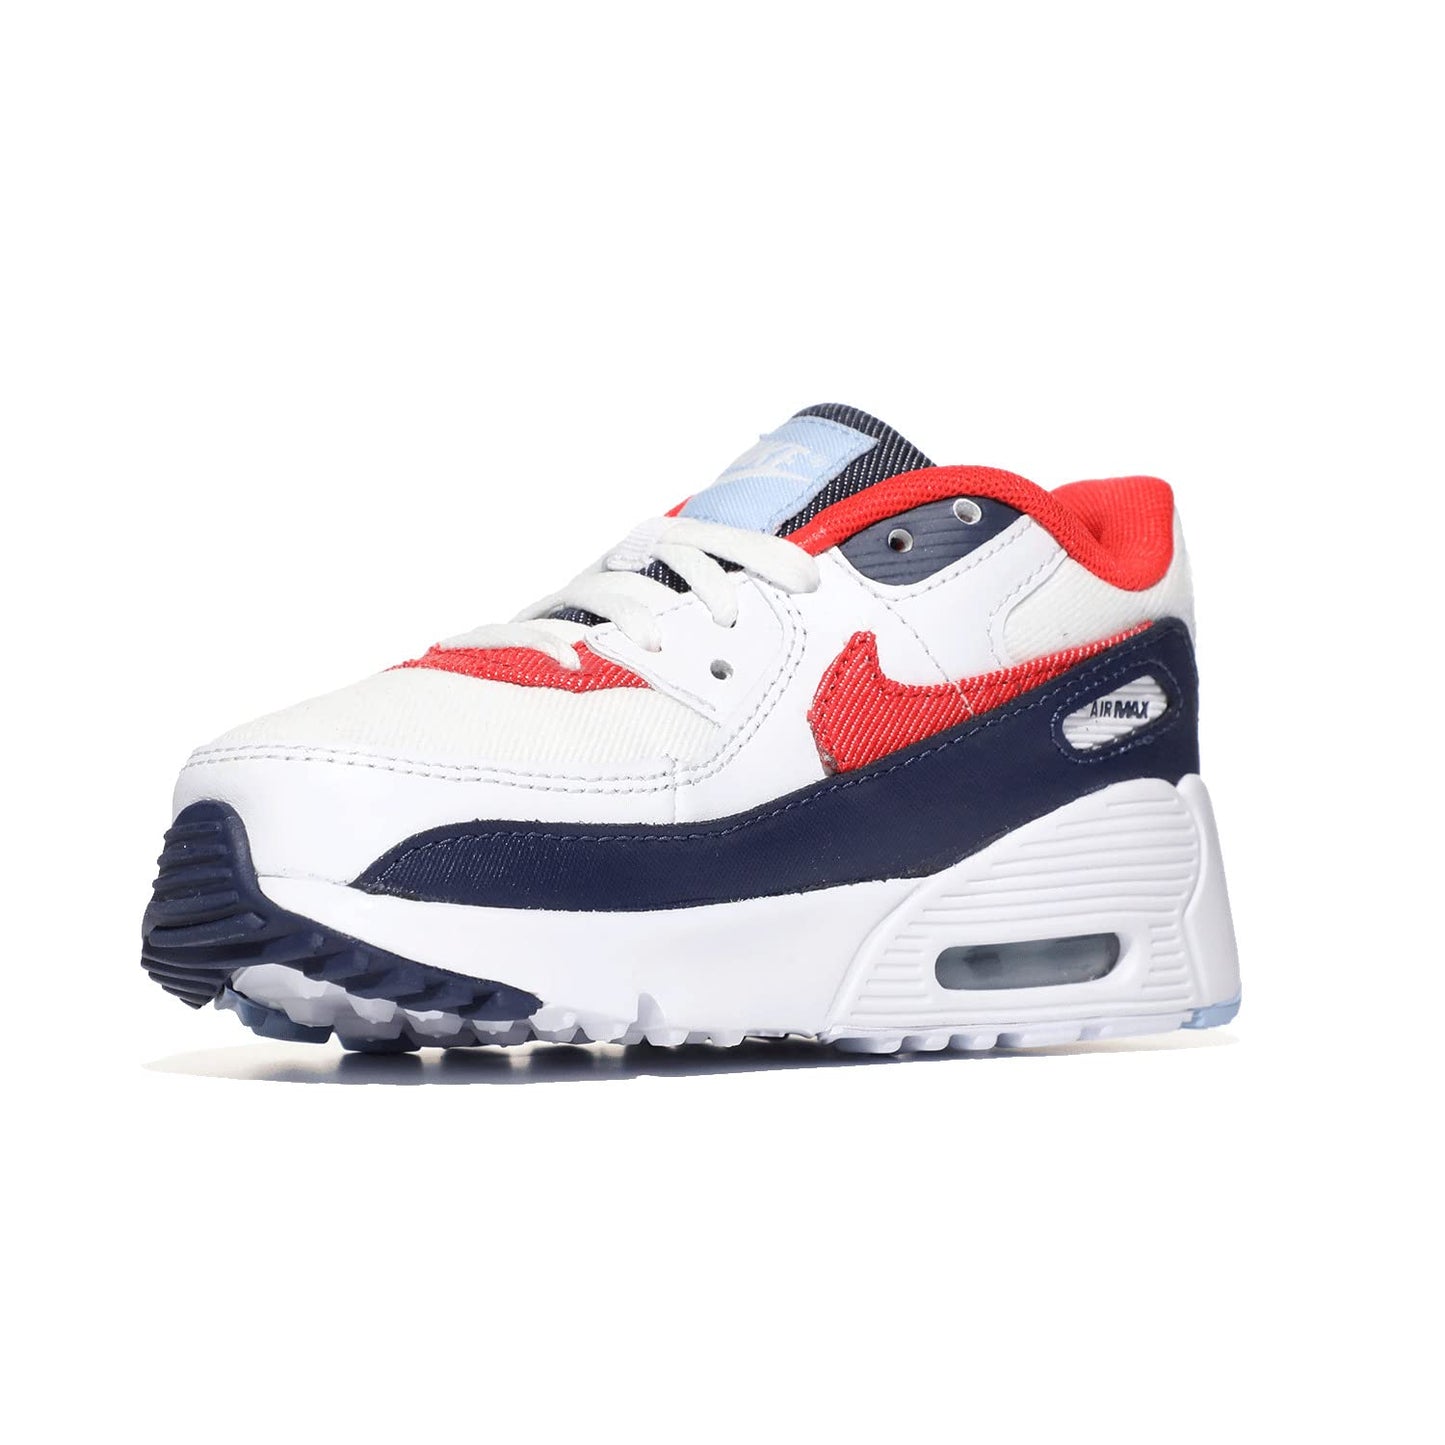 Image 2 of Air Max 90 (Infant/Toddler)